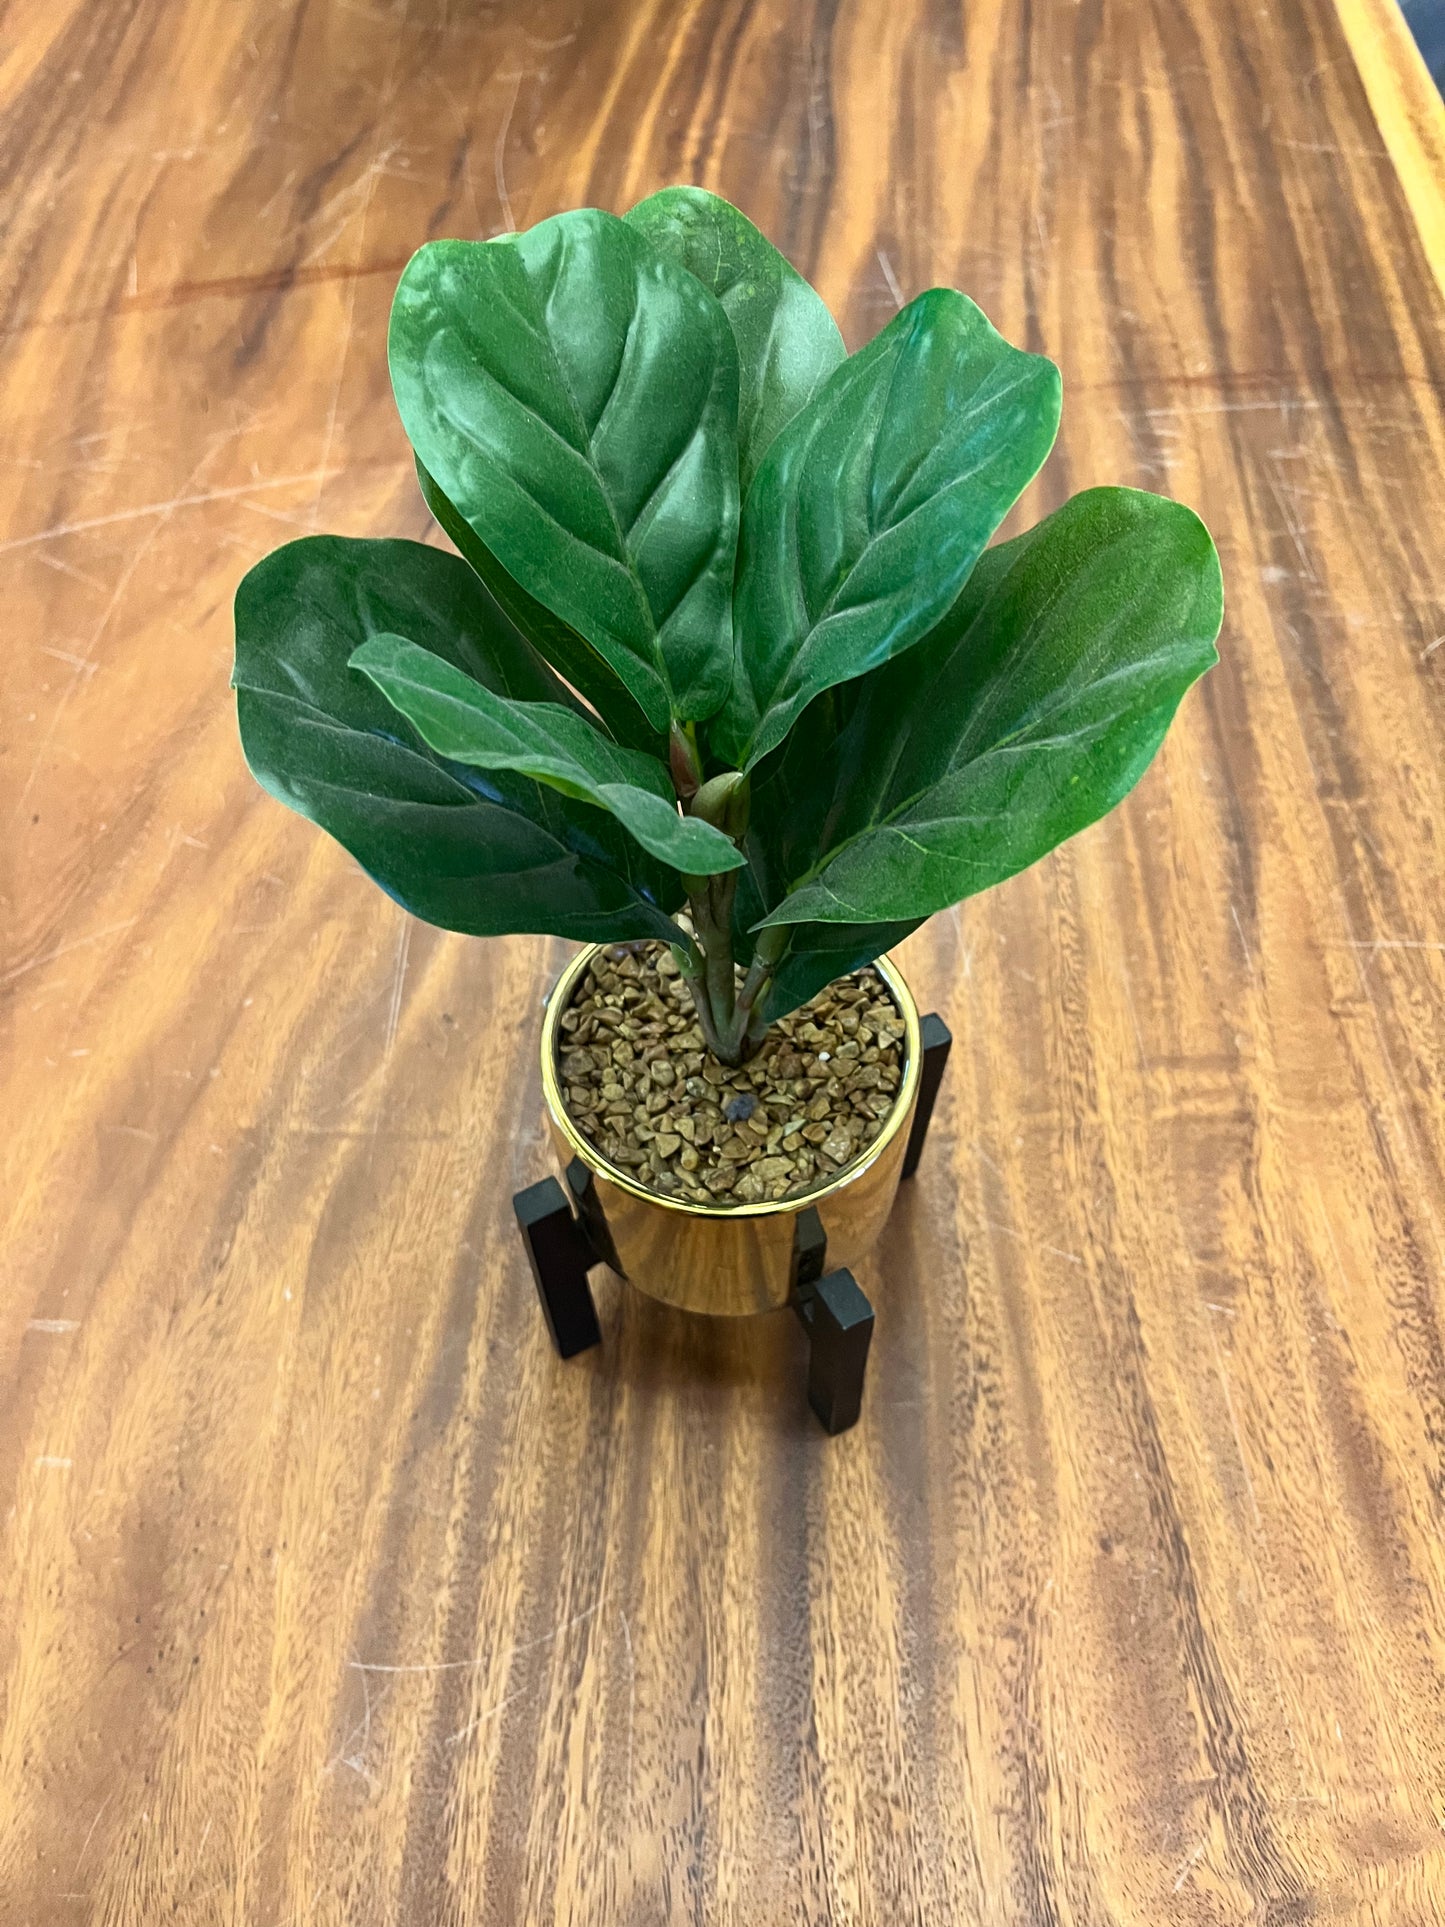 Silicon Valley: Gavin's Gold Potted Fake Plant